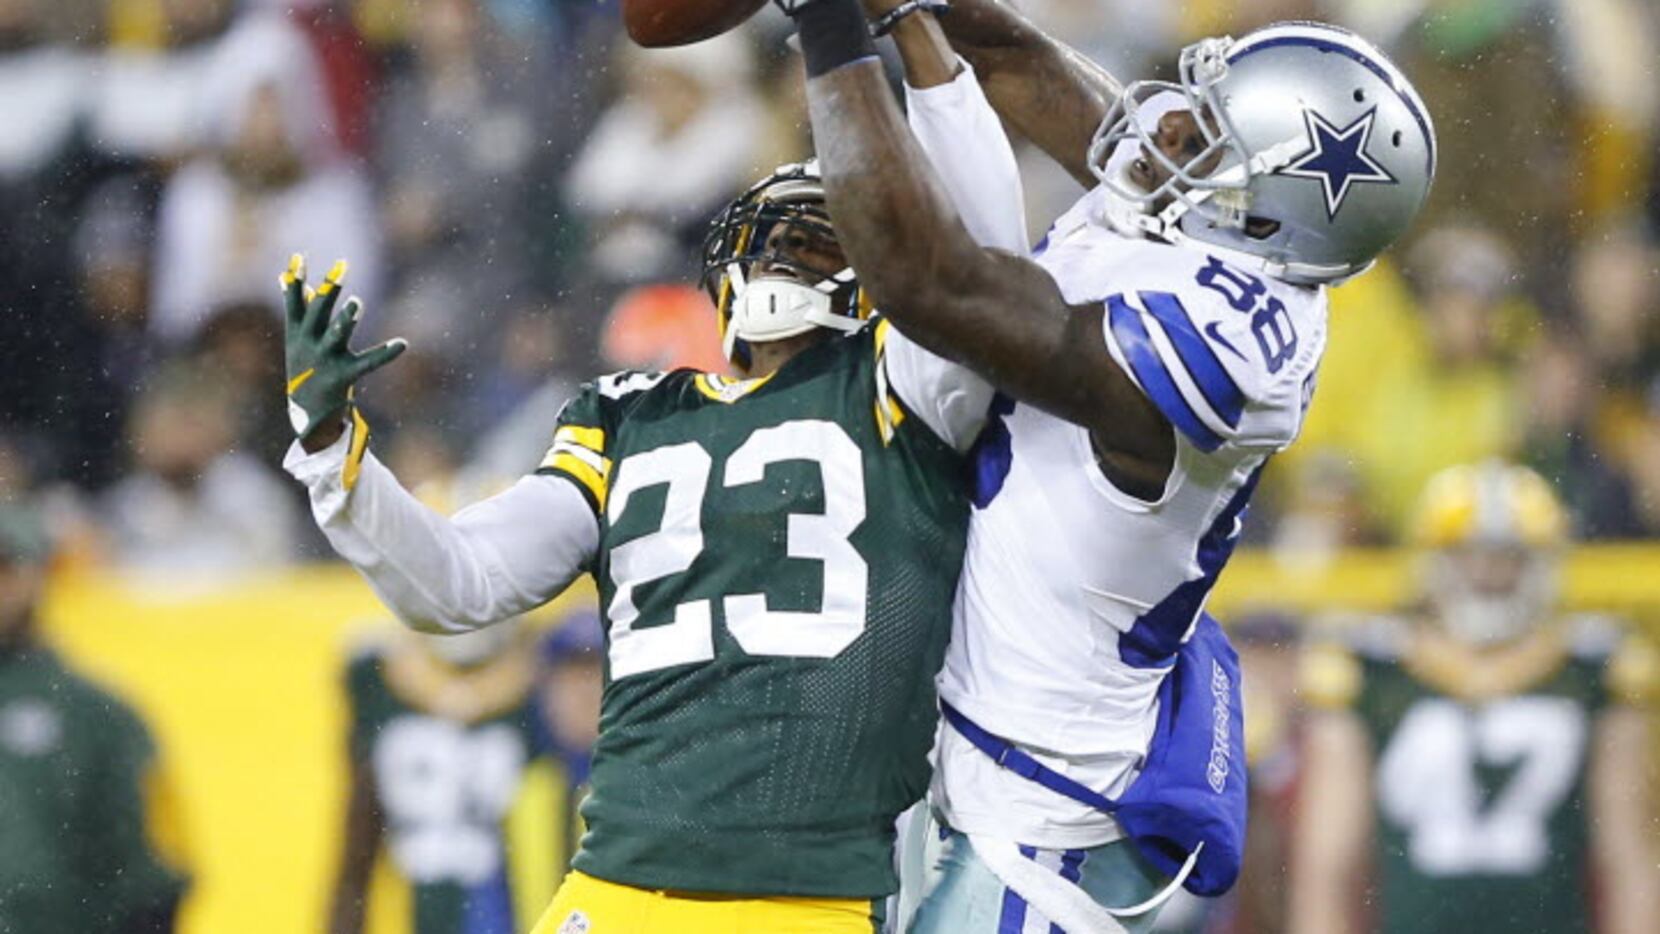 Referee who overturned Dez Bryant's catch in 2015 regular season